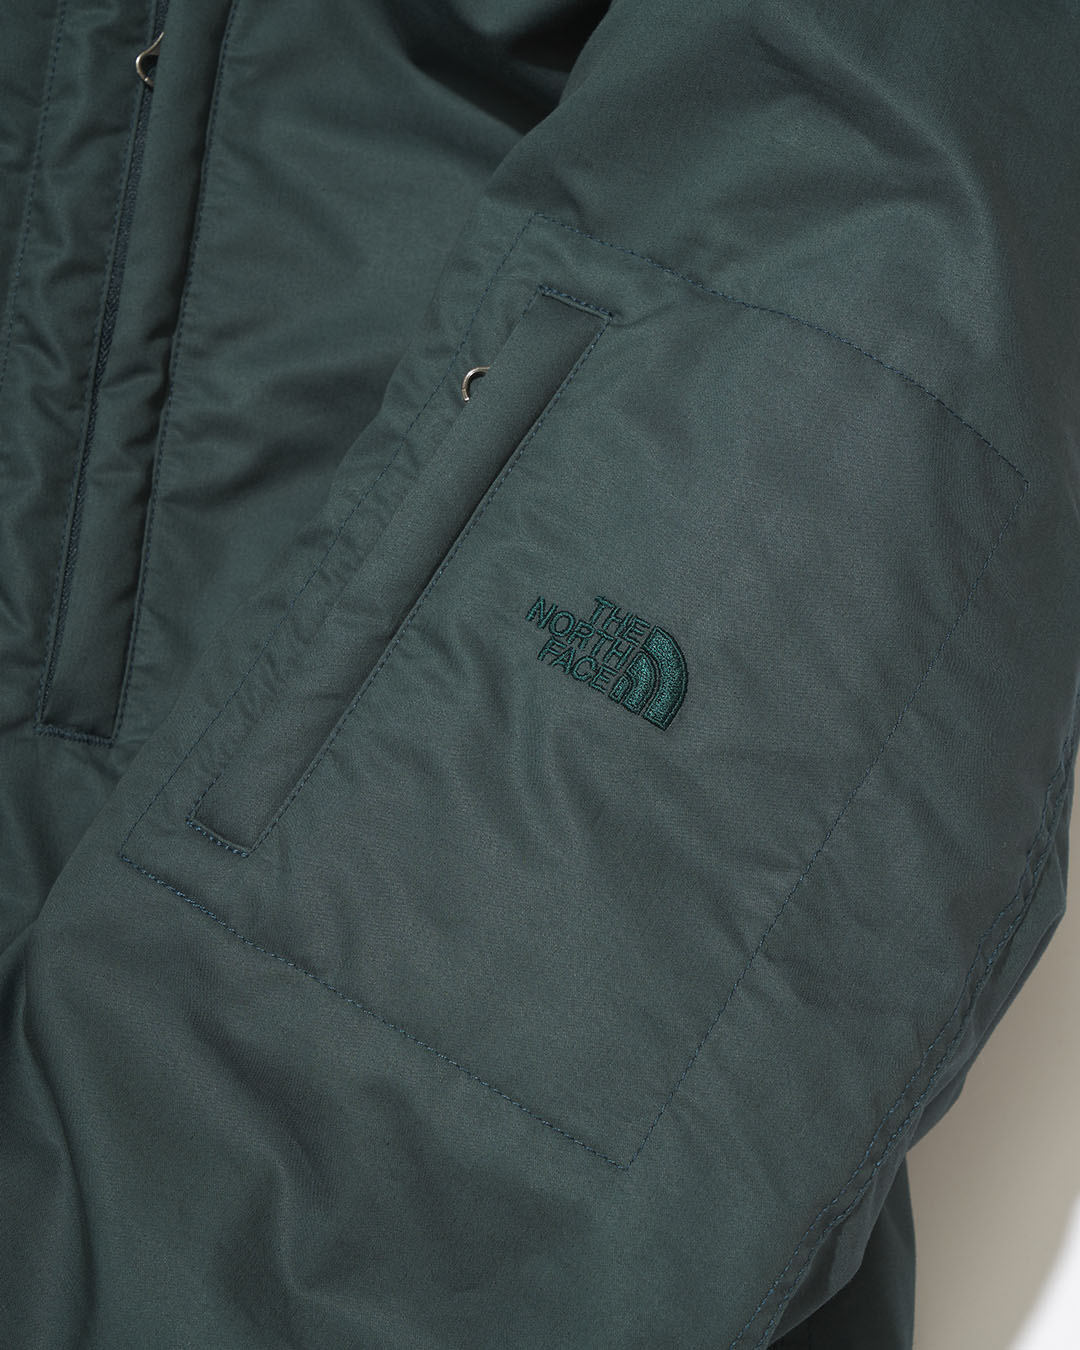 nanamica / THE NORTH FACE PURPLE LABEL / Featured Product vol